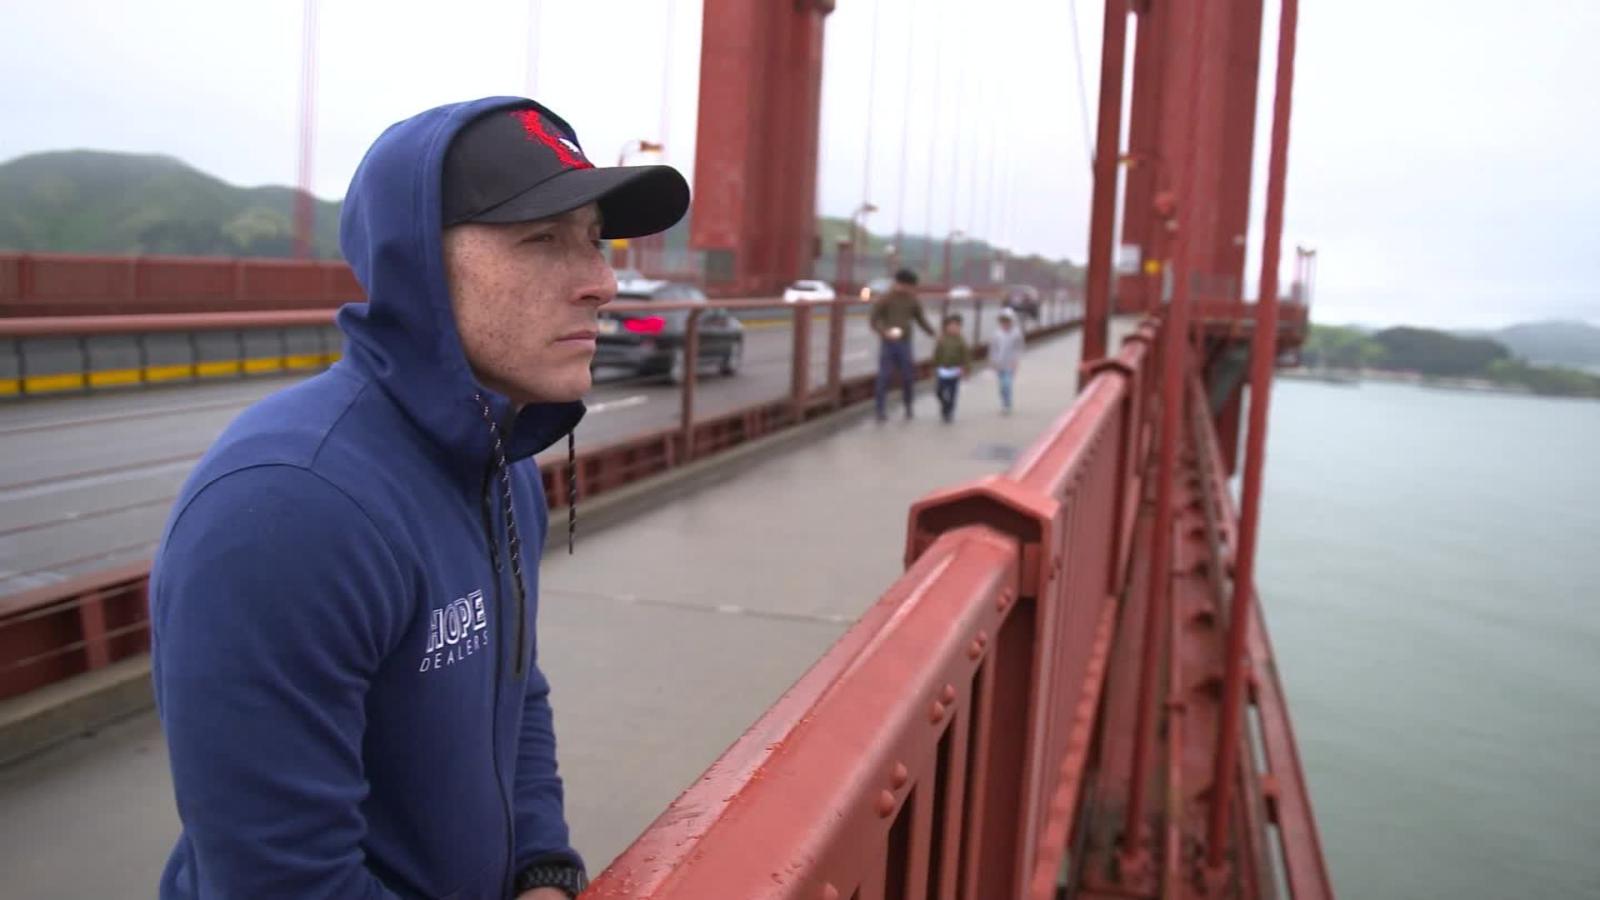 He jumped off the Golden Gate Bridge and survived. Now, he's seeing his